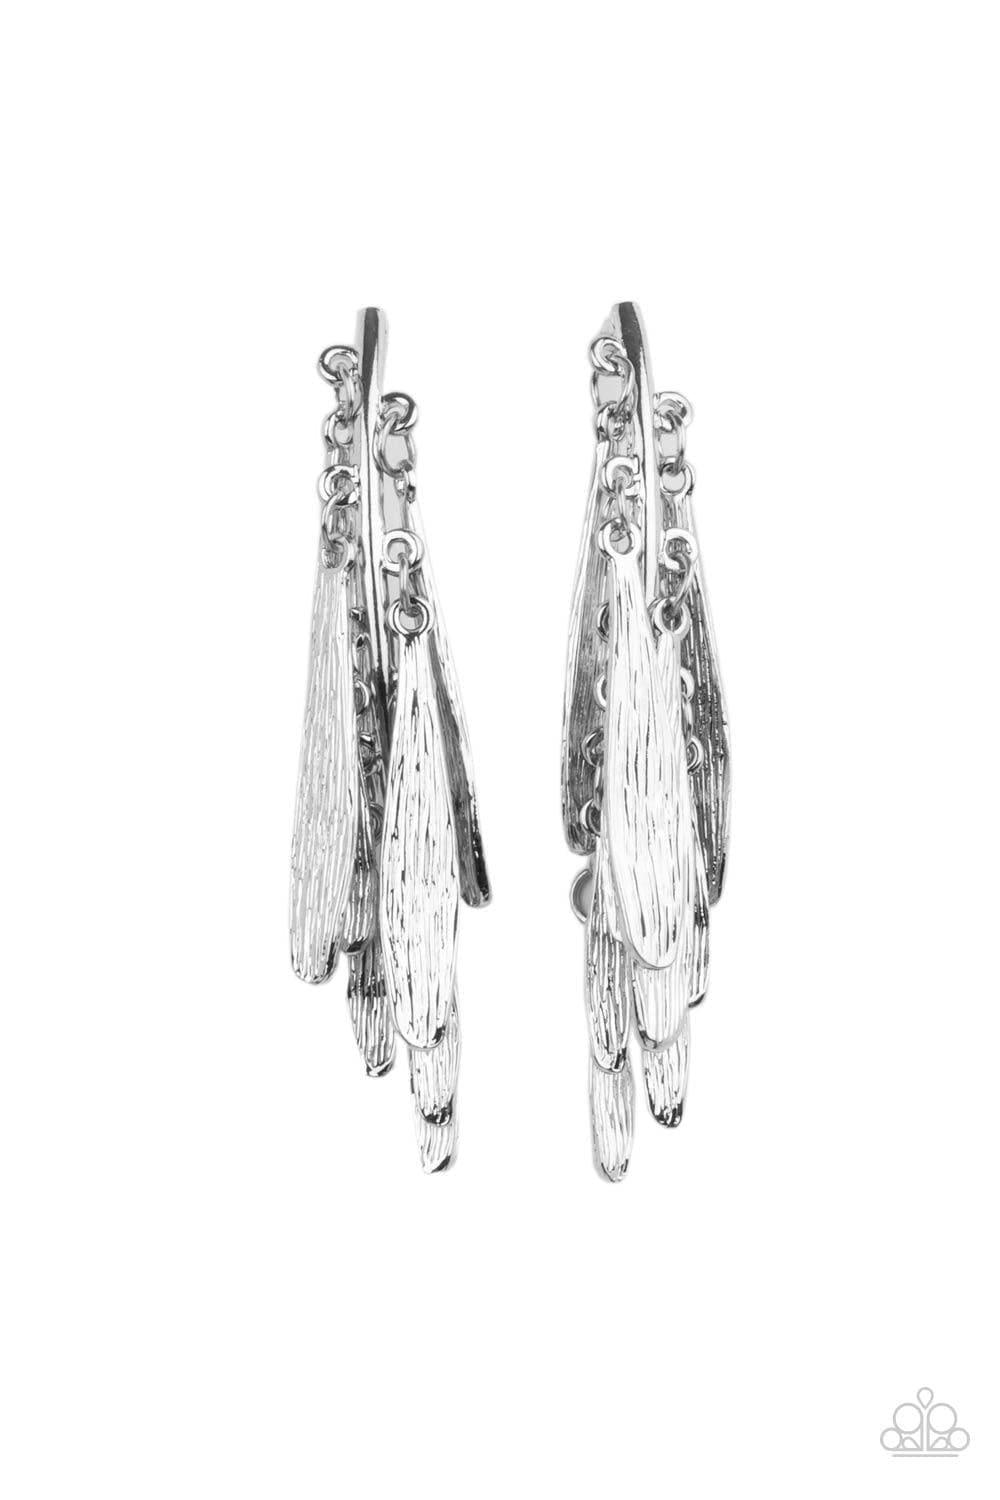 Paparazzi Accessories - Pursuing The Plumes - Silver Earrings - Bling by JessieK